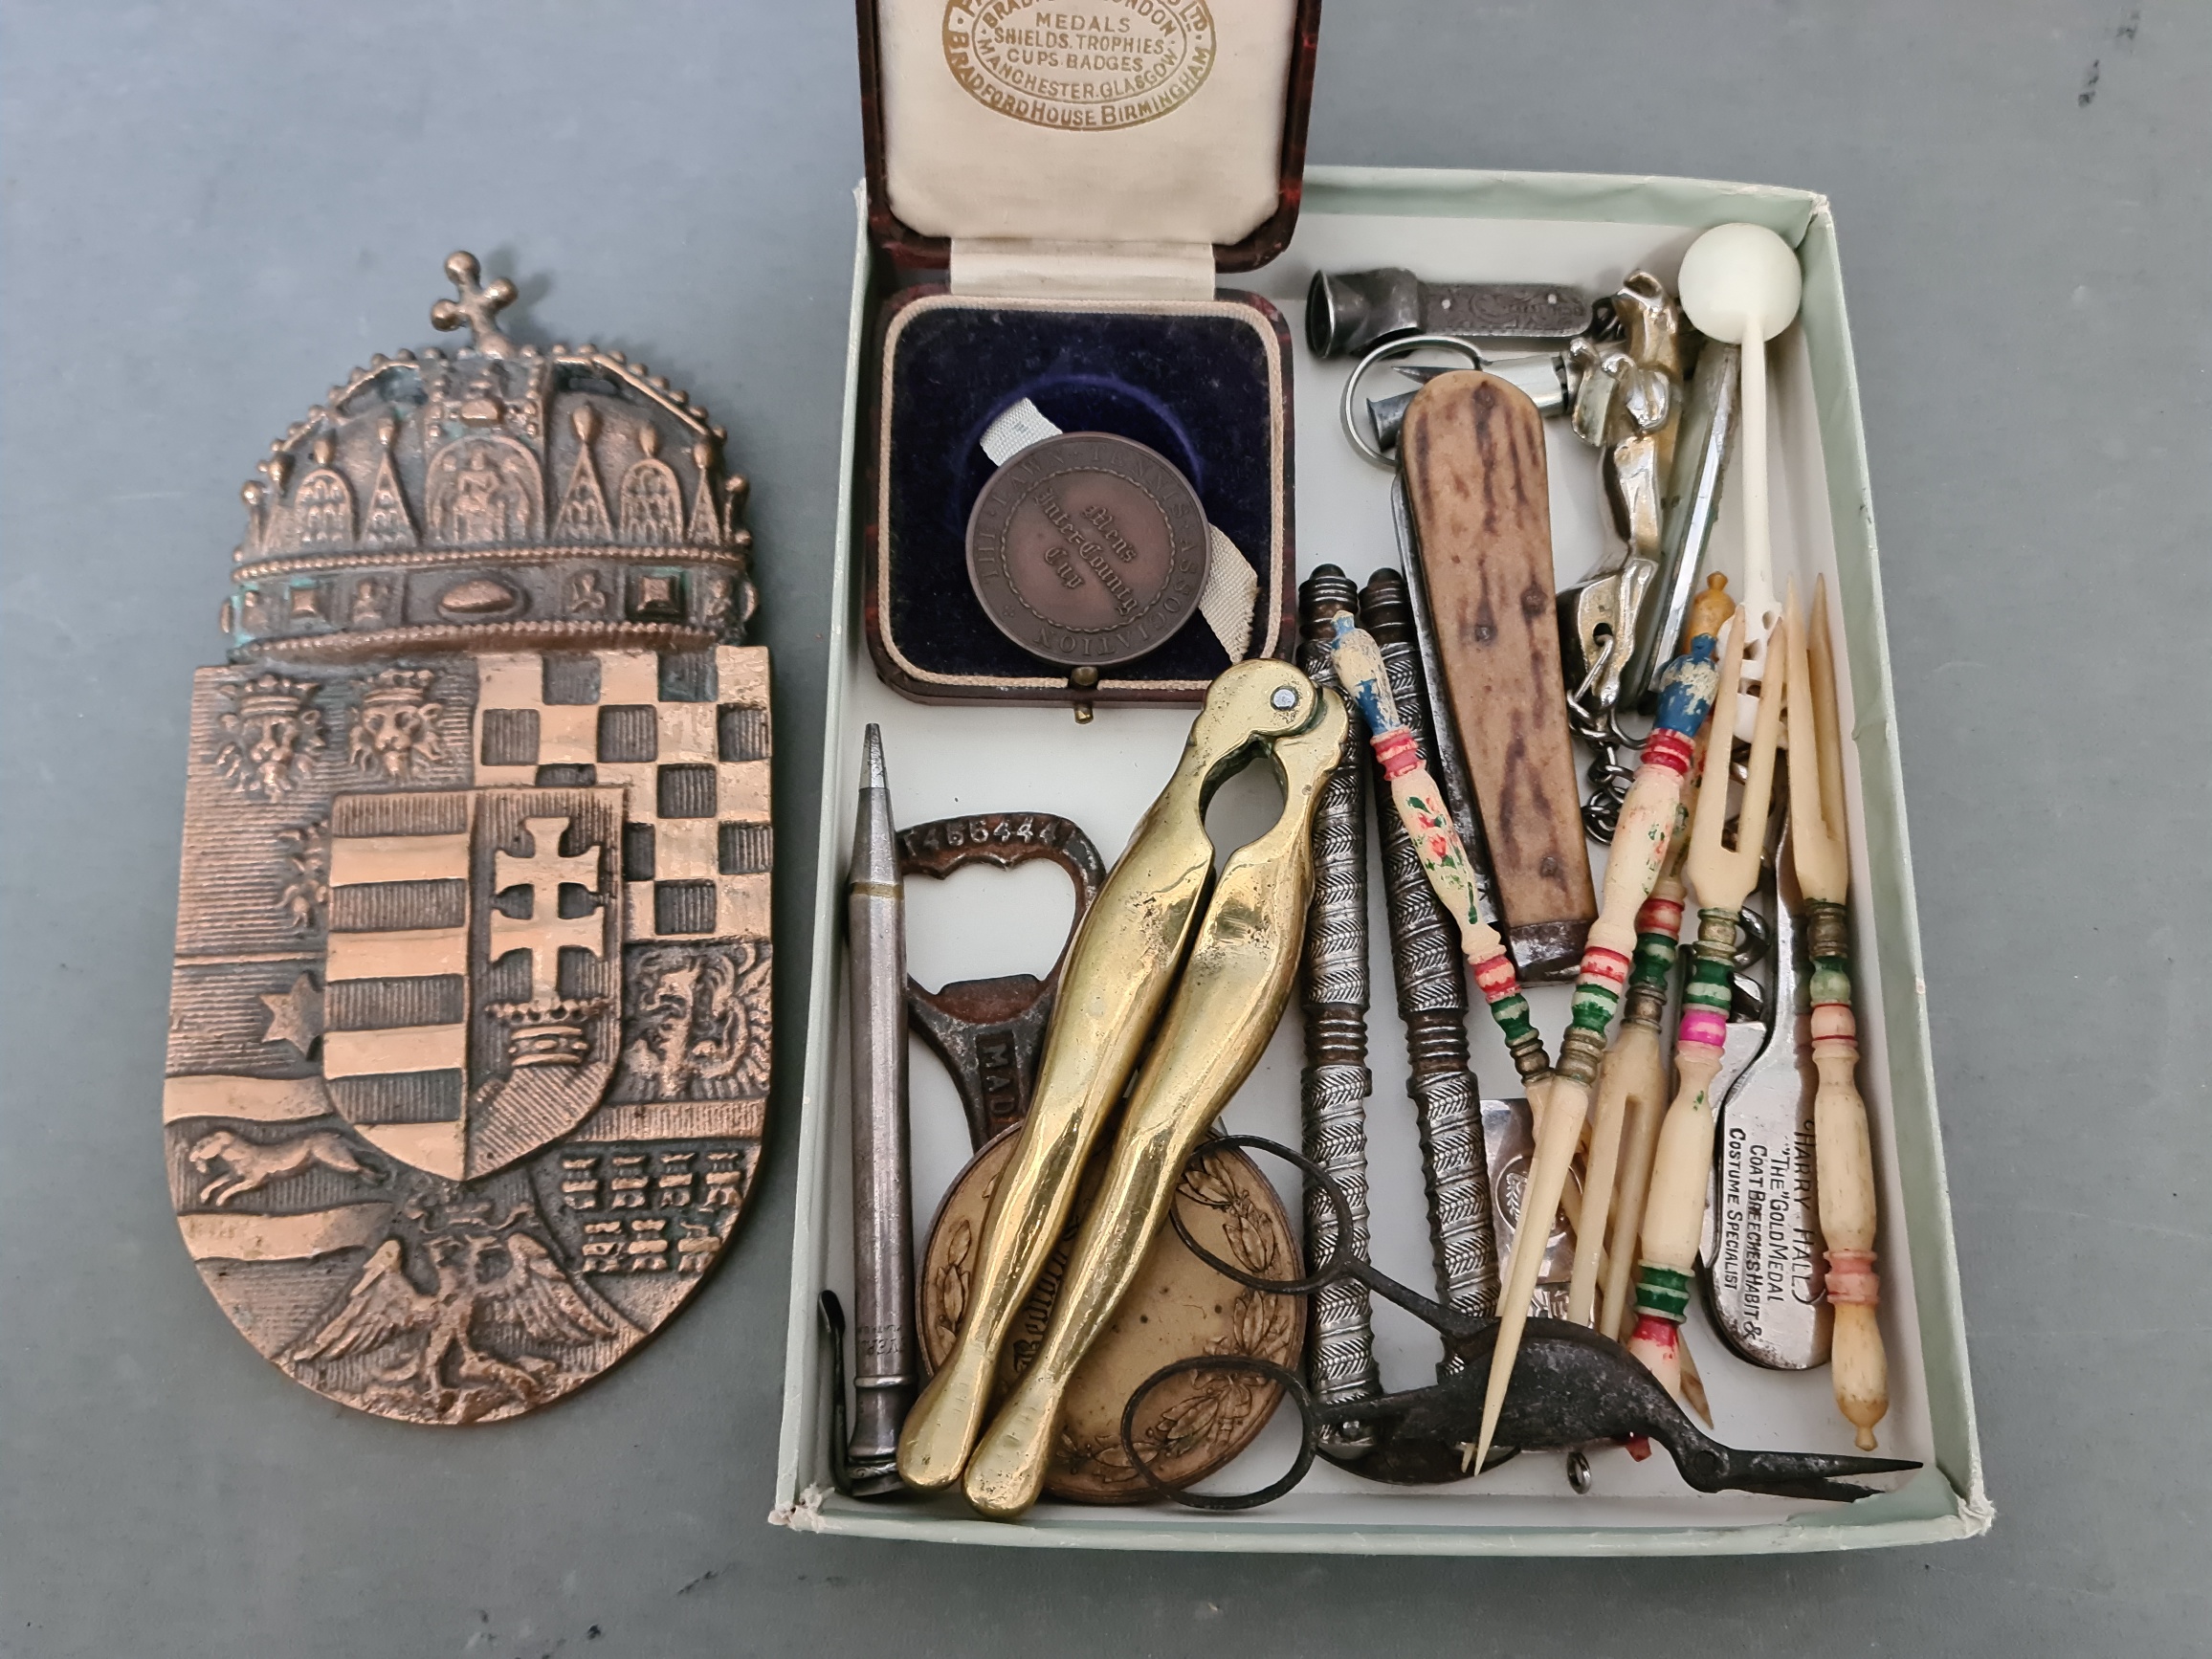 A small box of bric a brac including sports medals, penknives, propelling pencil etc